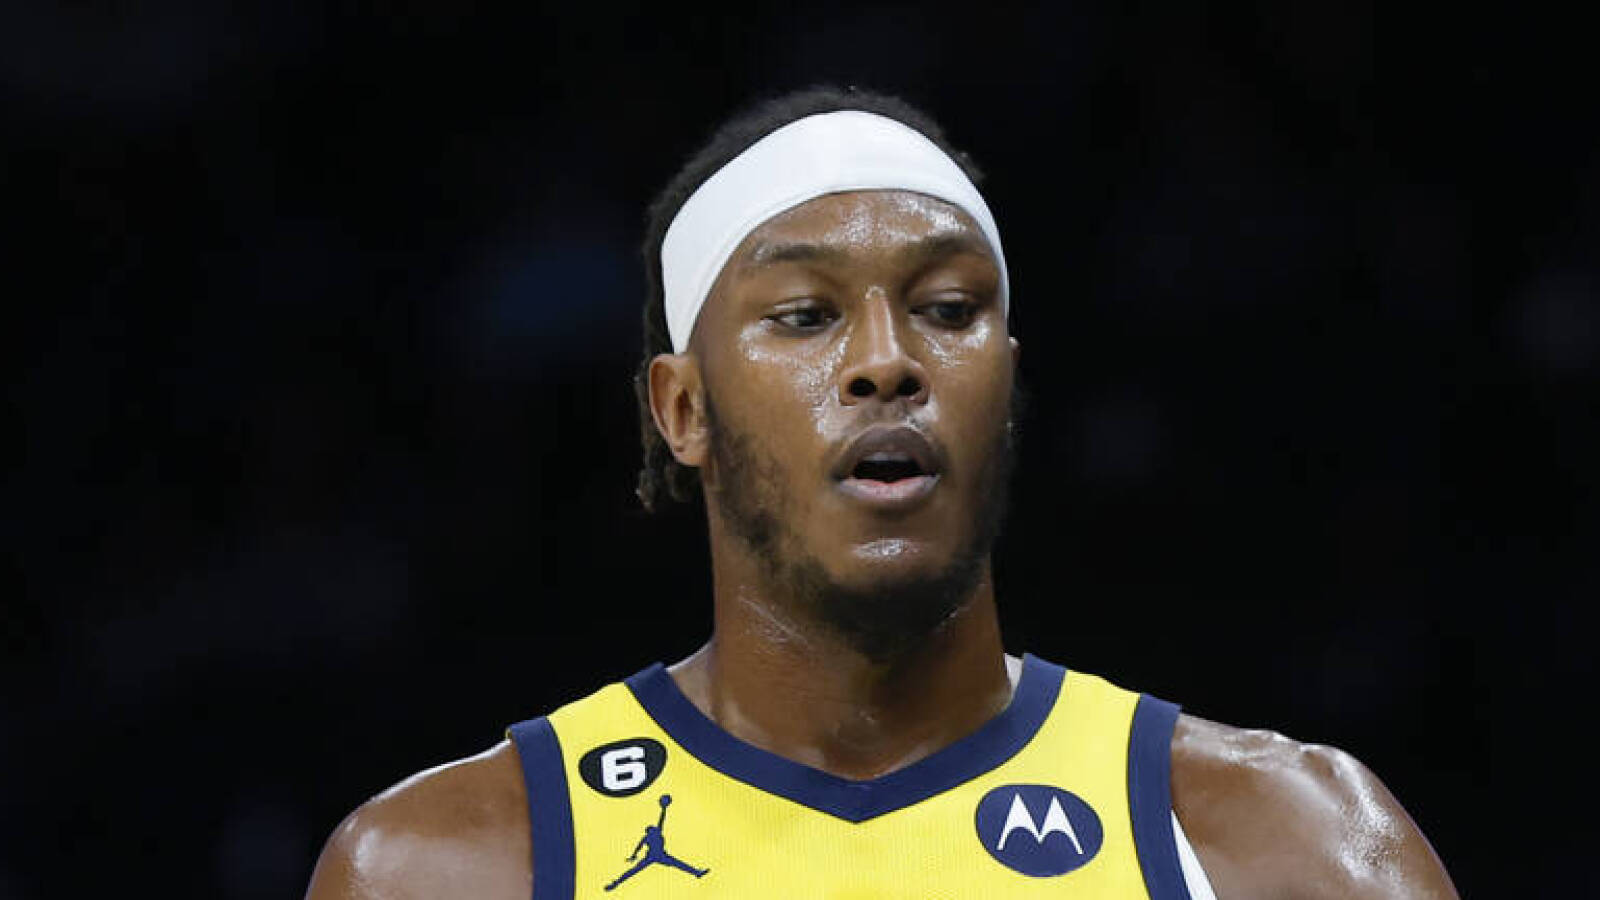 Myles Turner's hot take on guarding Joel Embiid doesn't hold water